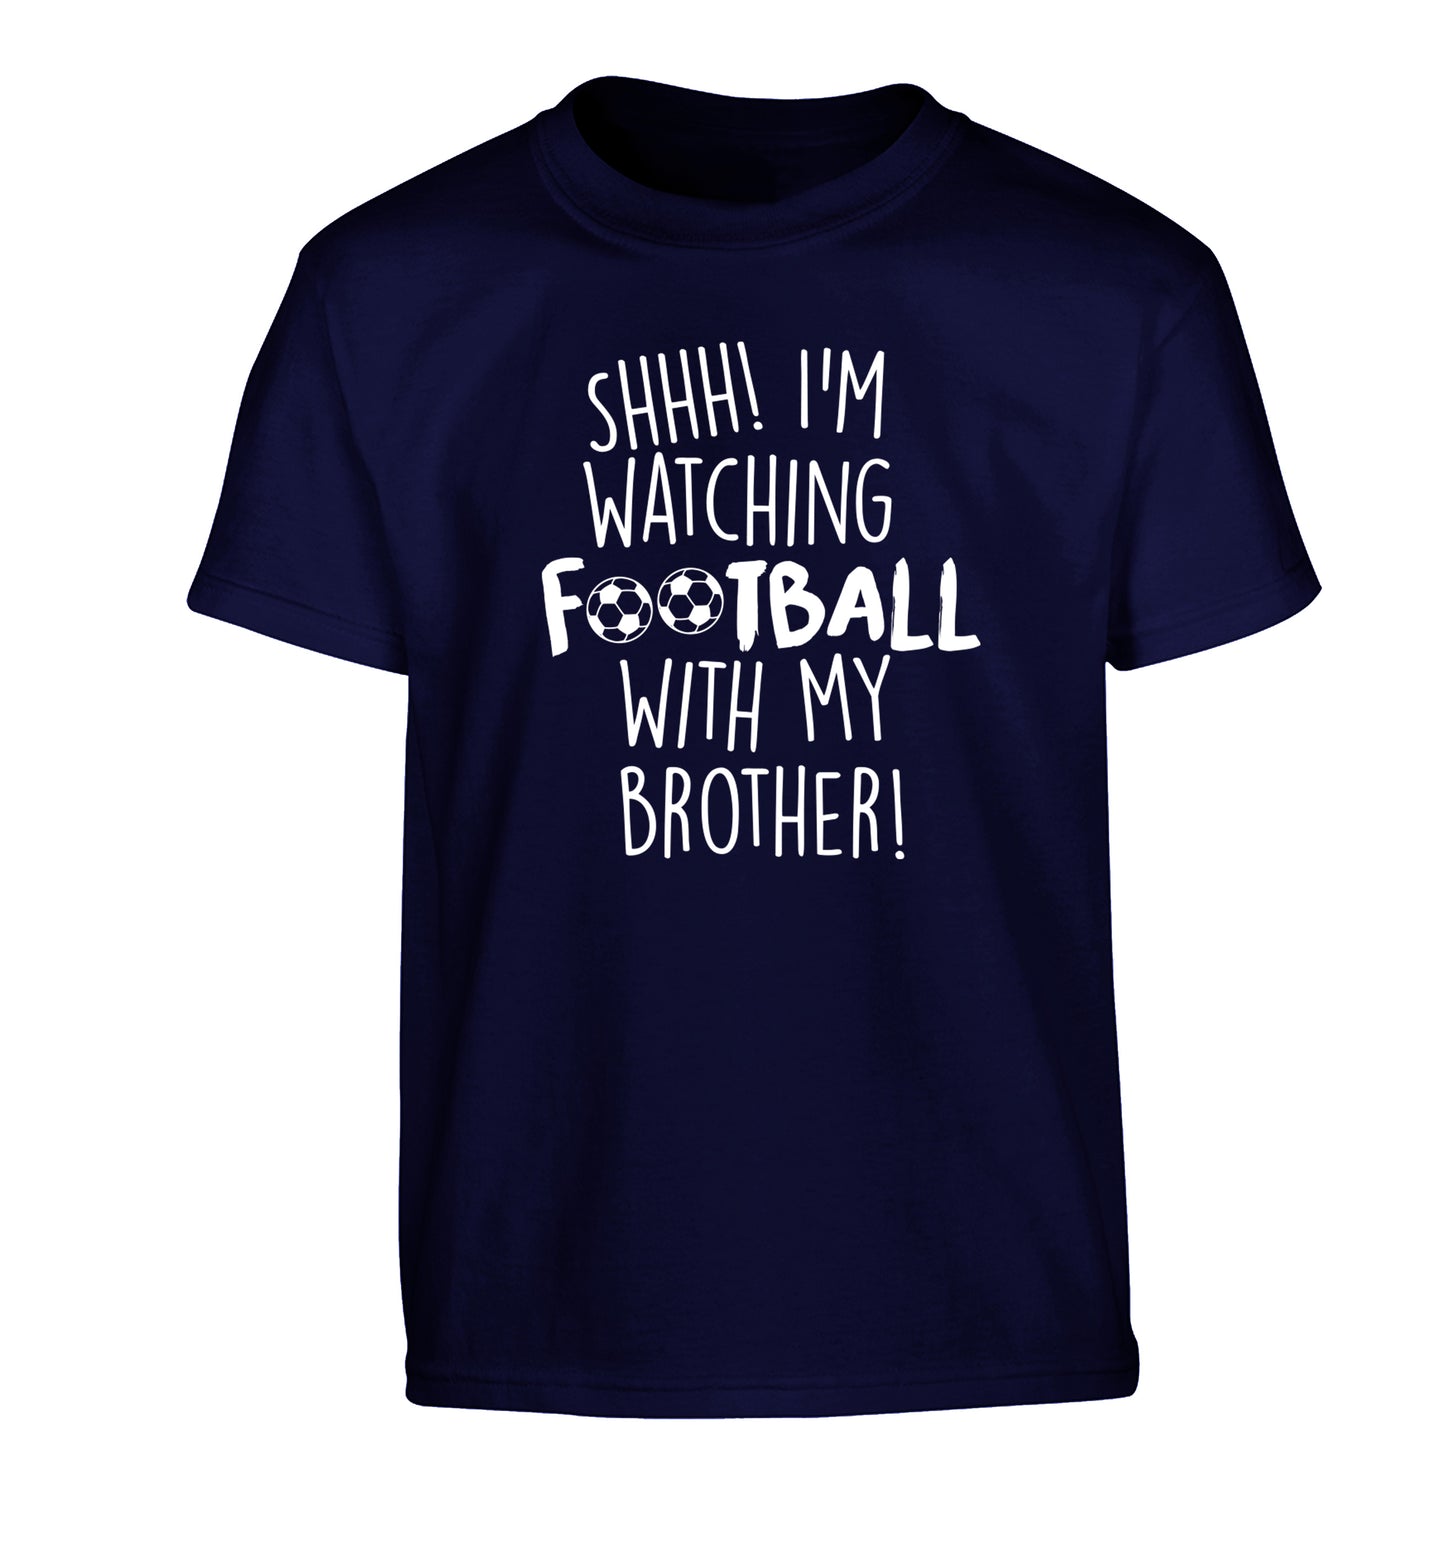 Shhh I'm watching football with my brother Children's navy Tshirt 12-14 Years